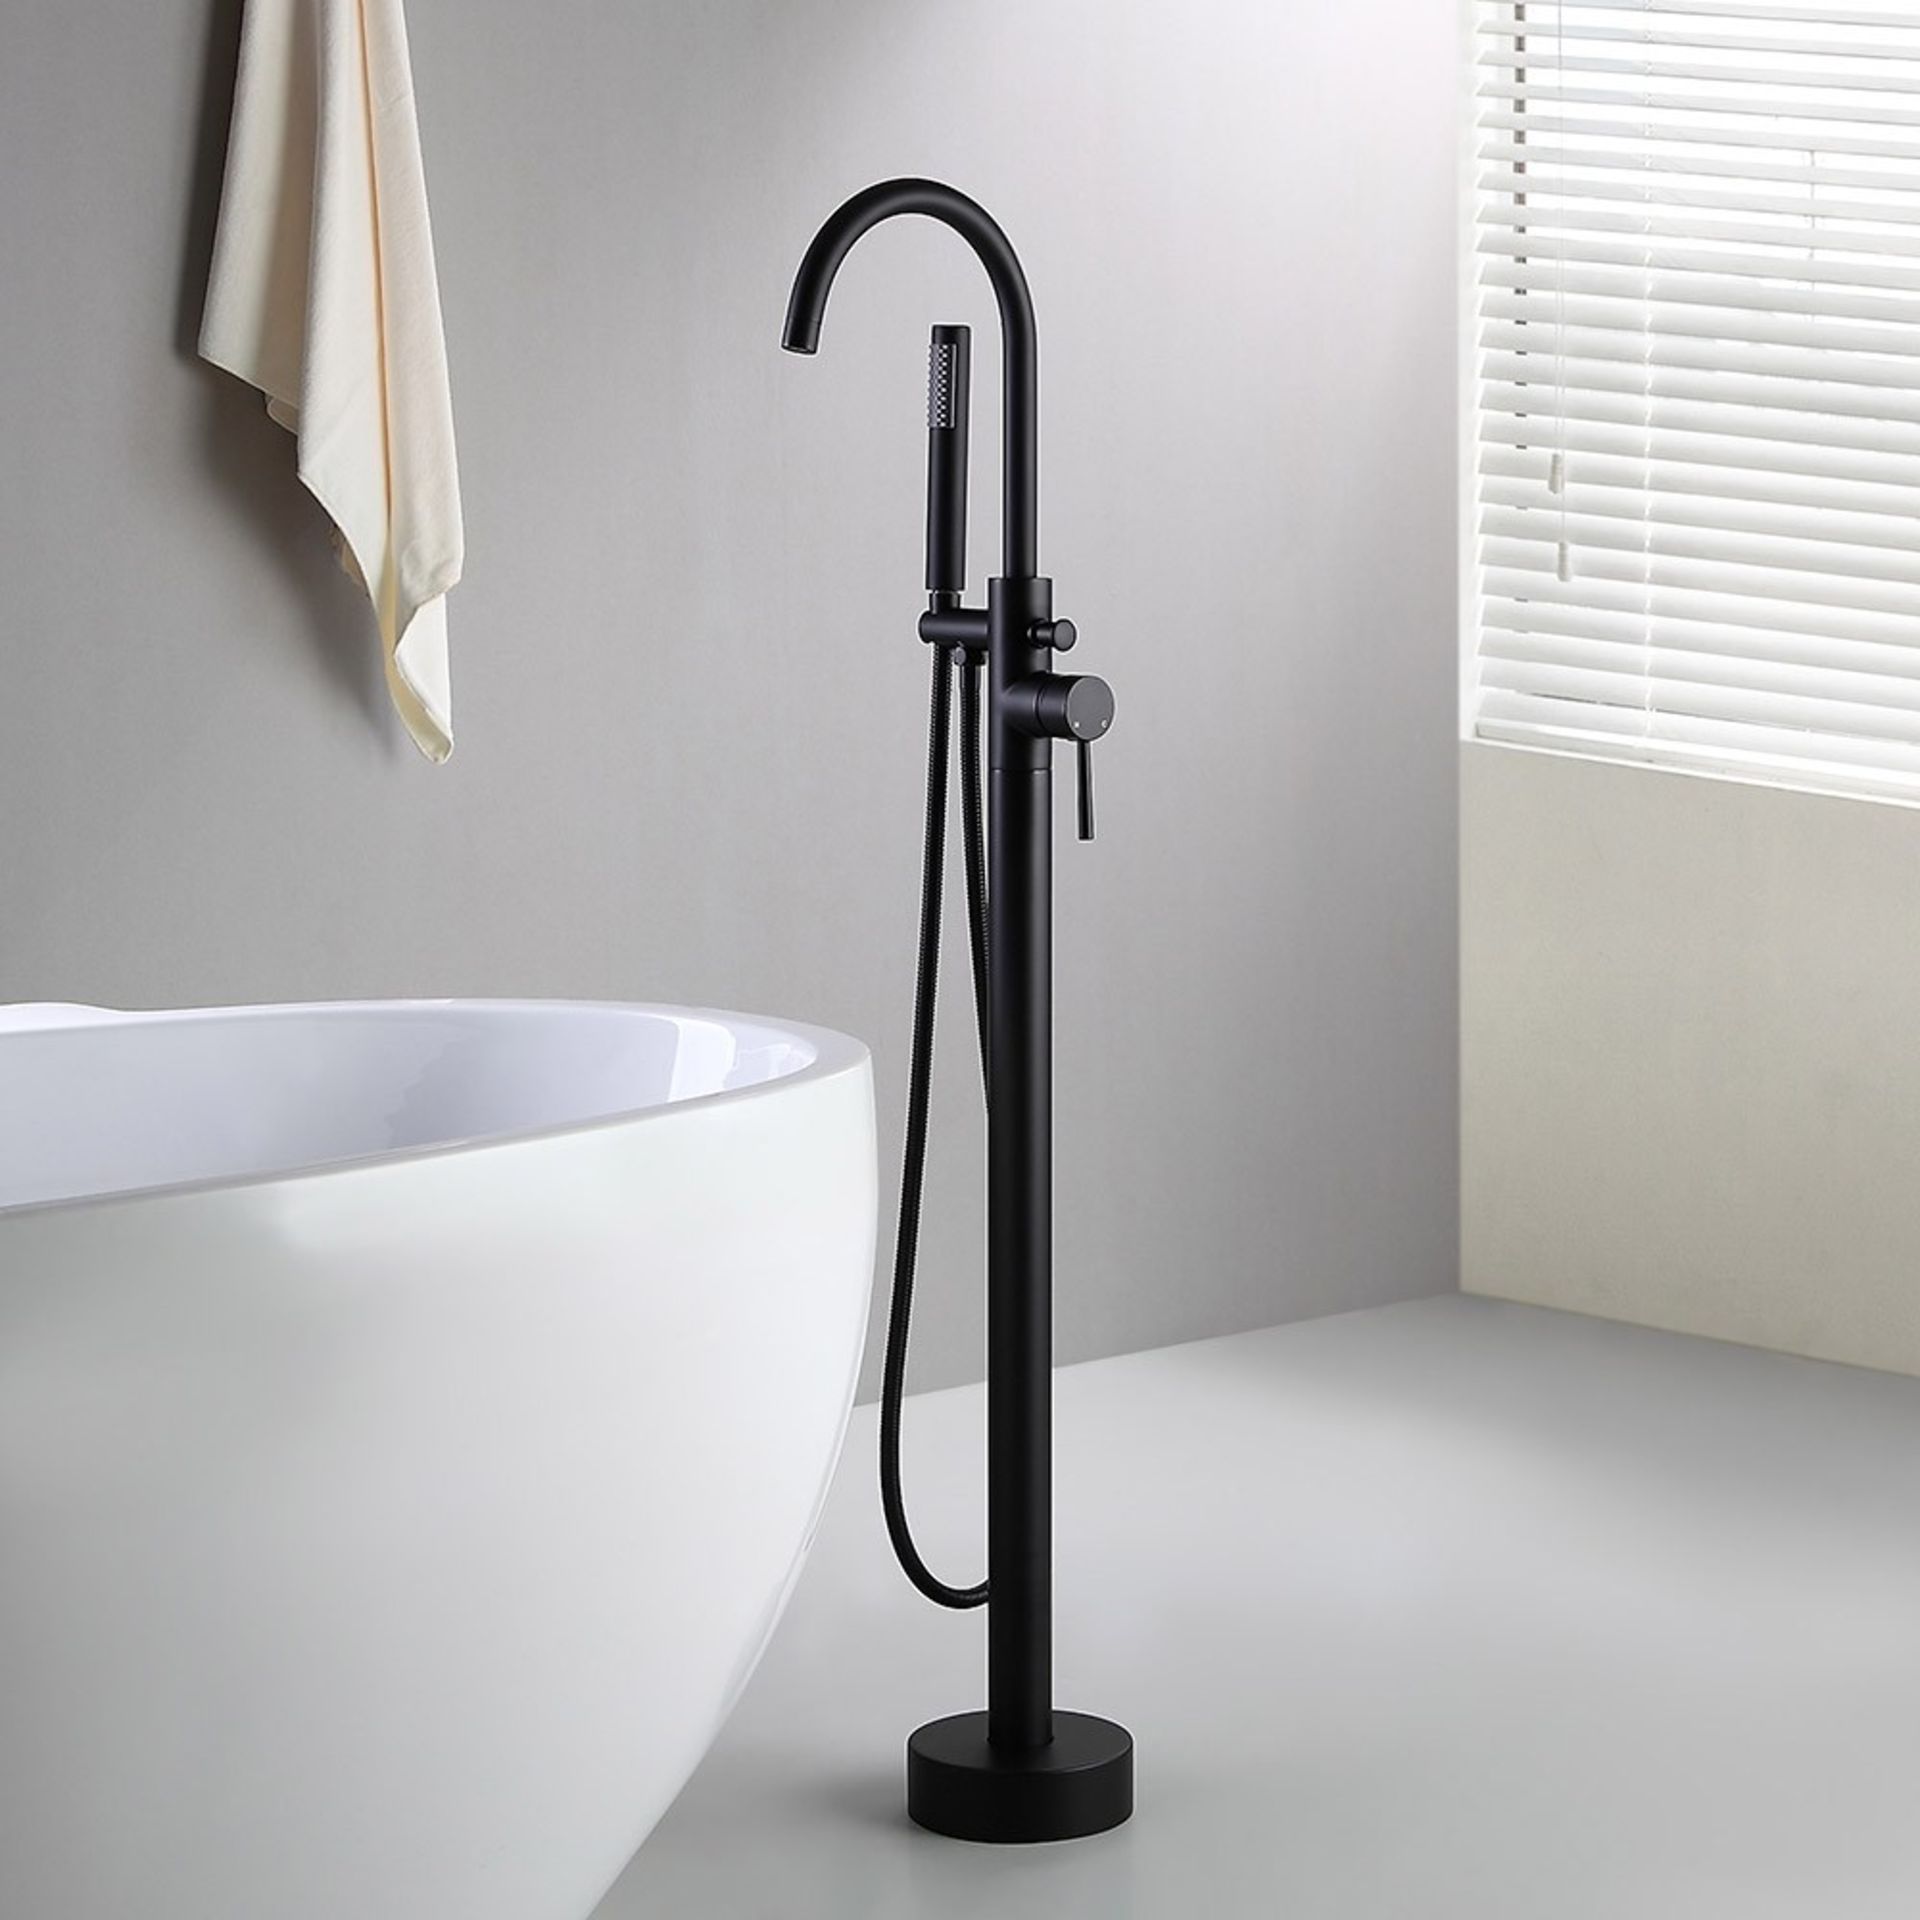 NEW Matte Black Gladstone Freestanding Thermostatic Bath Mixer Tap with Hand Held Shower Head. ... - Image 2 of 5